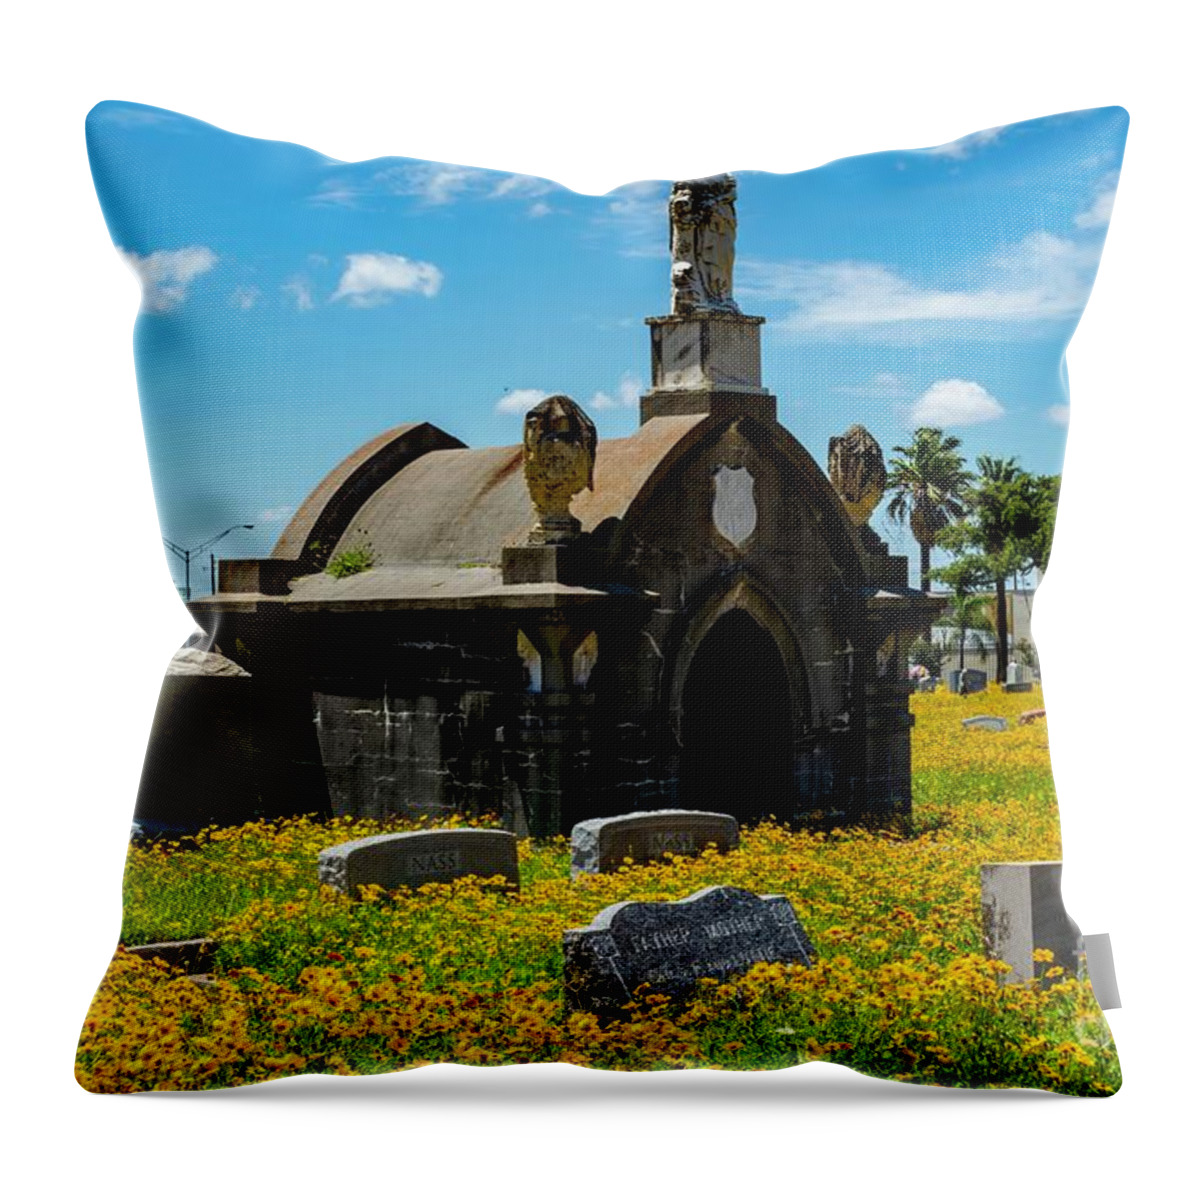 Old Throw Pillow featuring the photograph Old City Cemetery by Diana Mary Sharpton